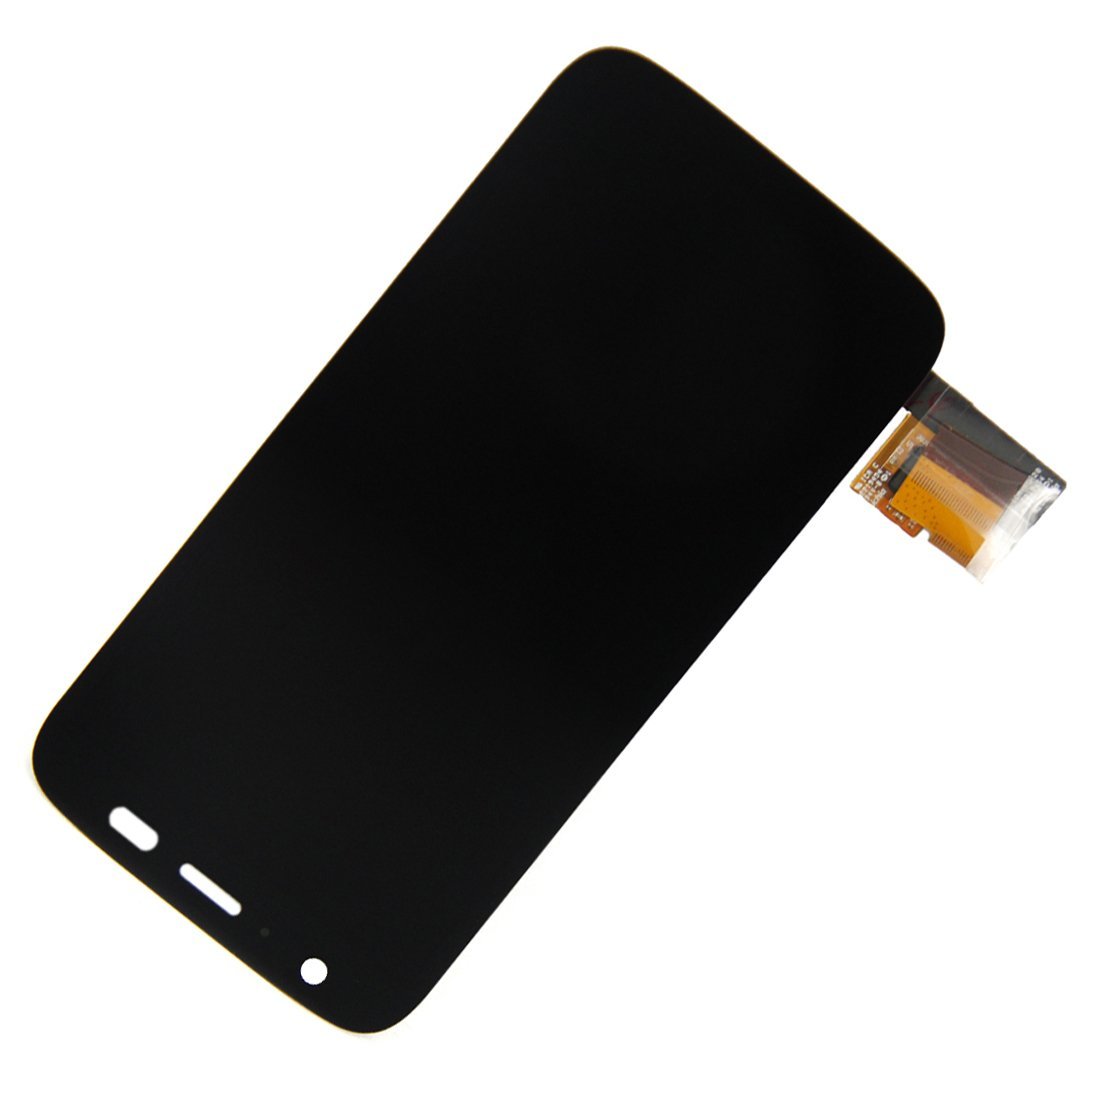 LCD Display Touch Screen Digitizer Screen Assembly for Motorola Moto G XT1032